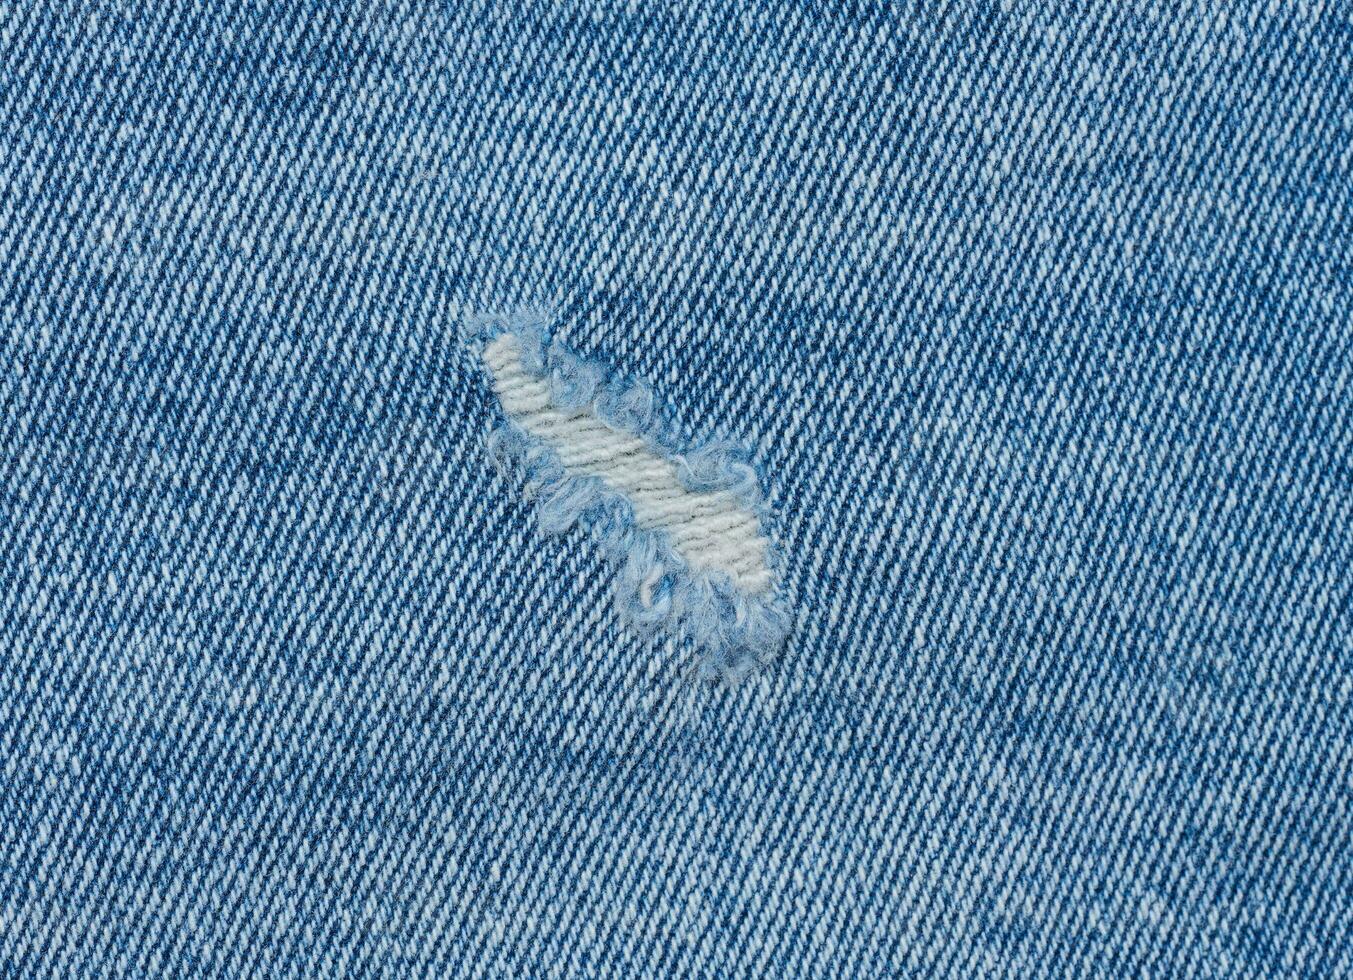 Fragment of blue jeans fabric with a hole, full frame, close up photo